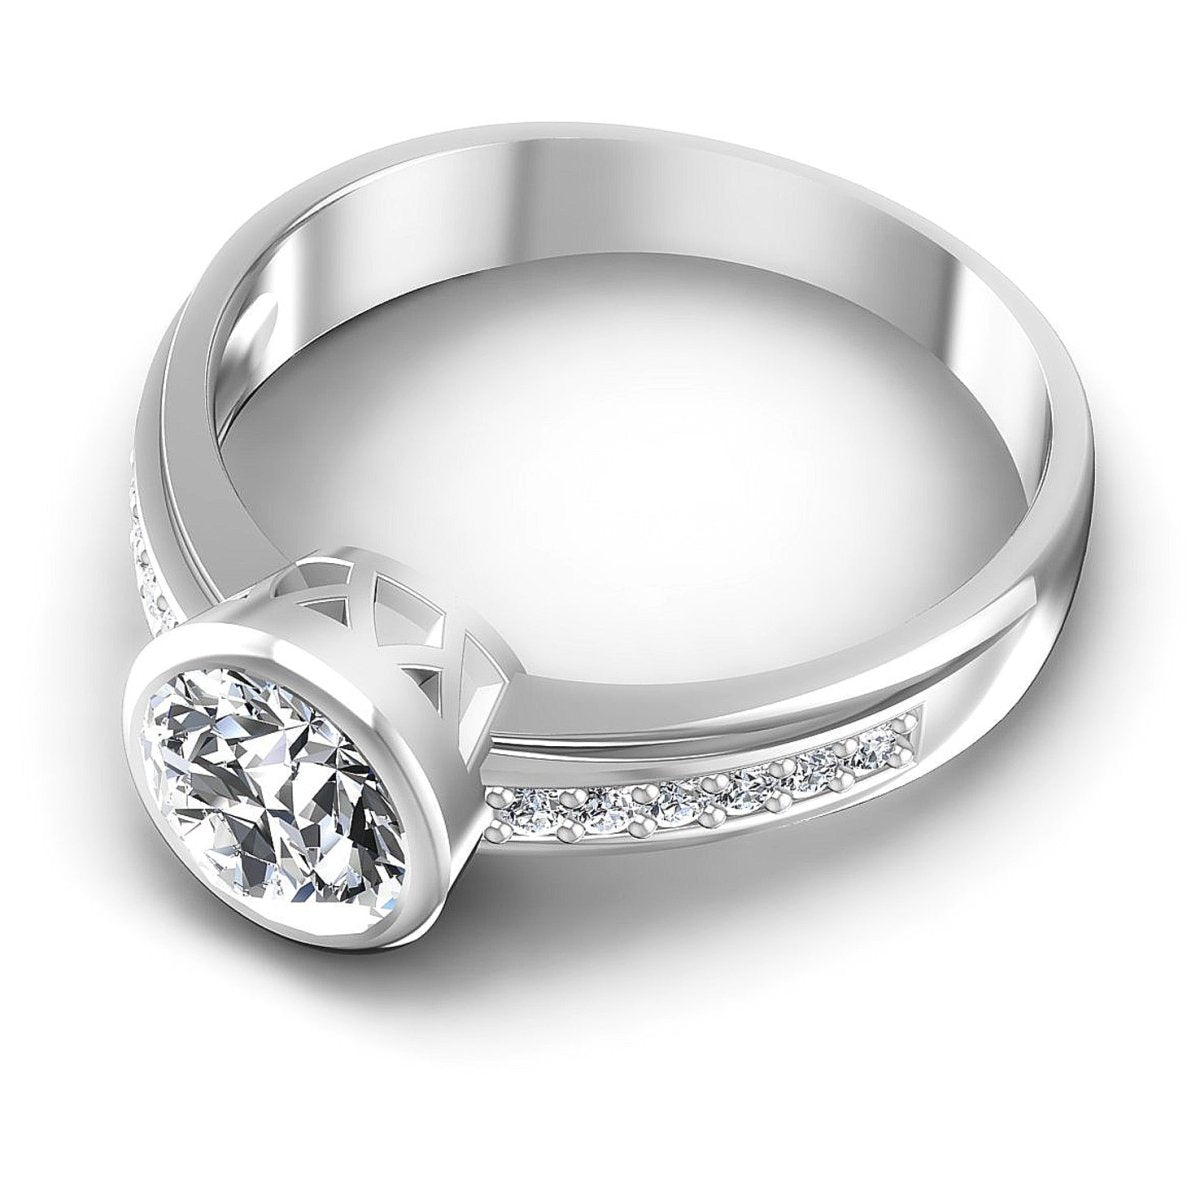 Stunning 0.50 CT Round Cut Diamond Engagement Ring in 14 KT White Gold - Primestyle.com